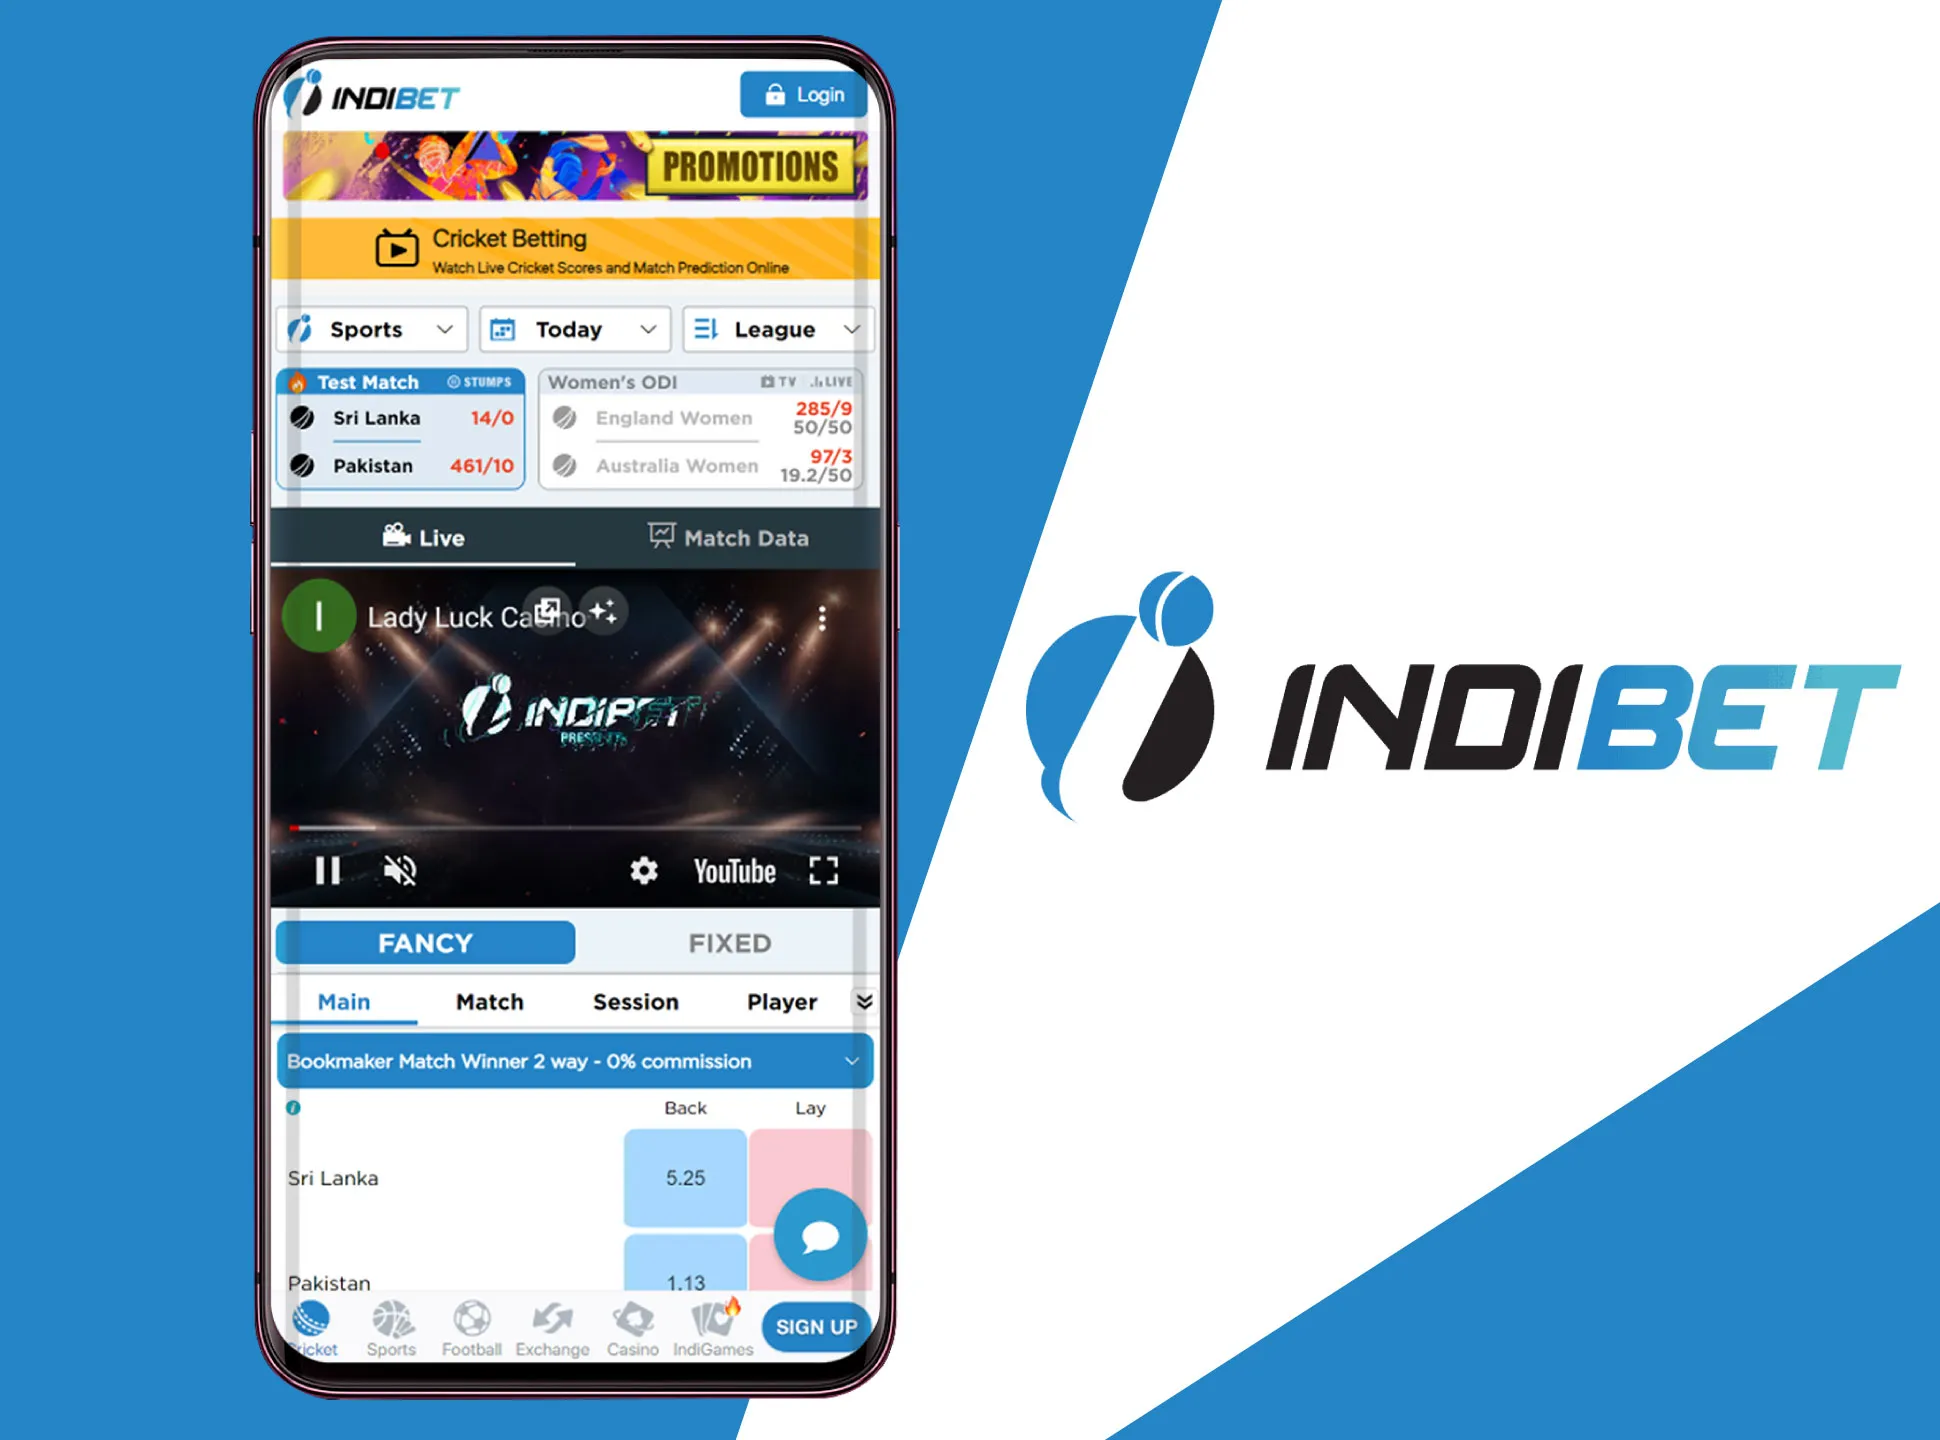 Learn more about the features of the Indibet app.